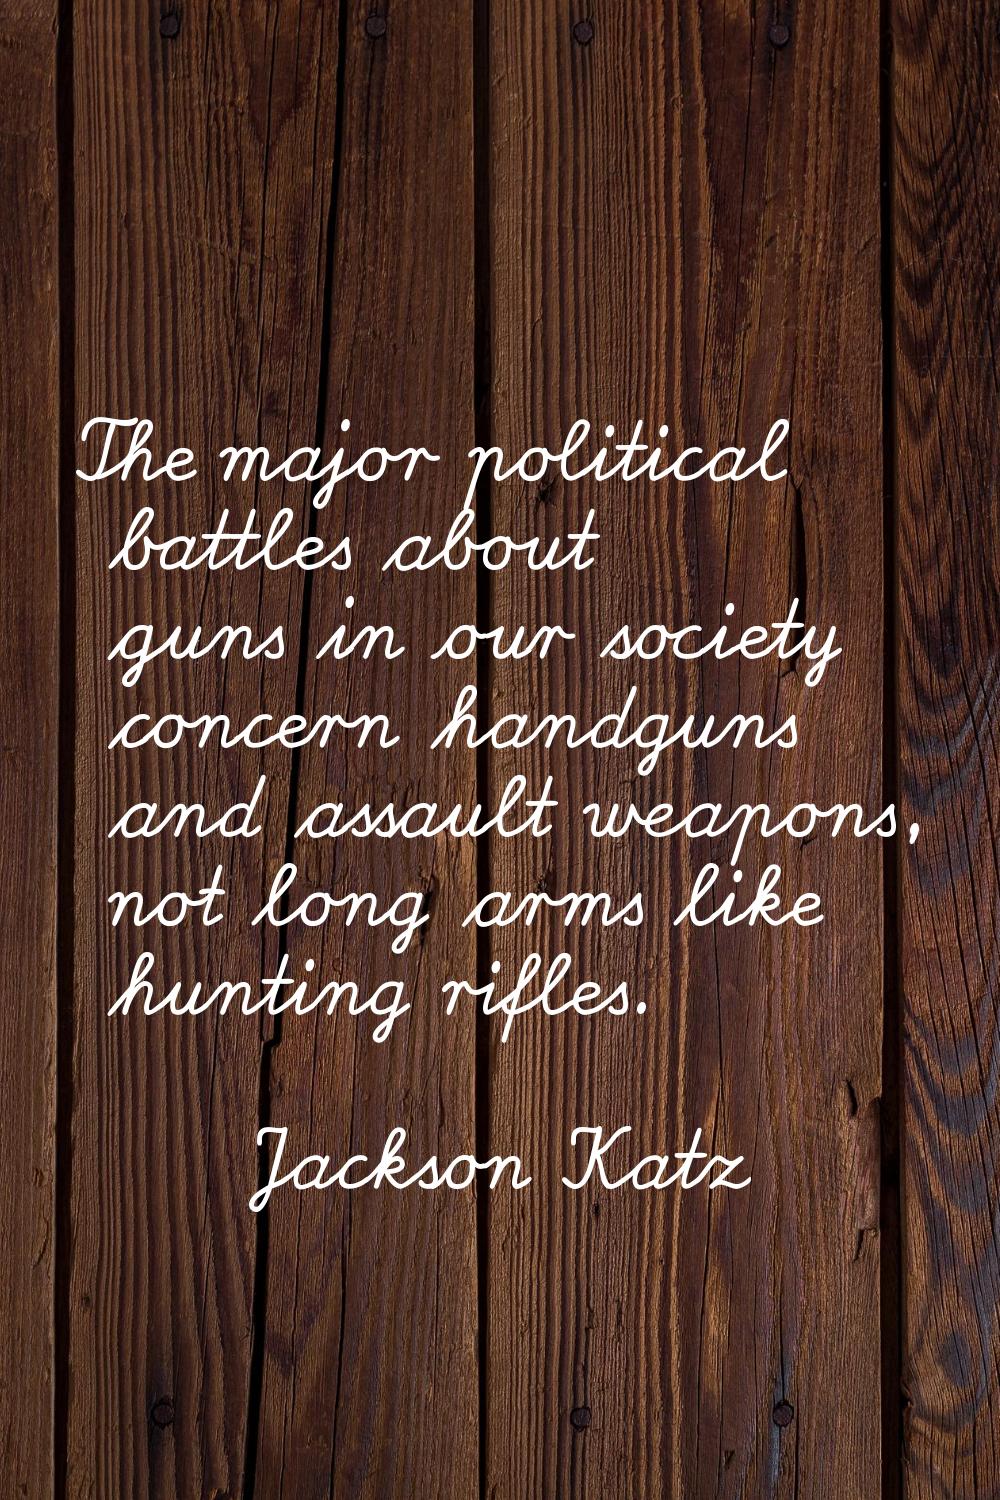 The major political battles about guns in our society concern handguns and assault weapons, not lon